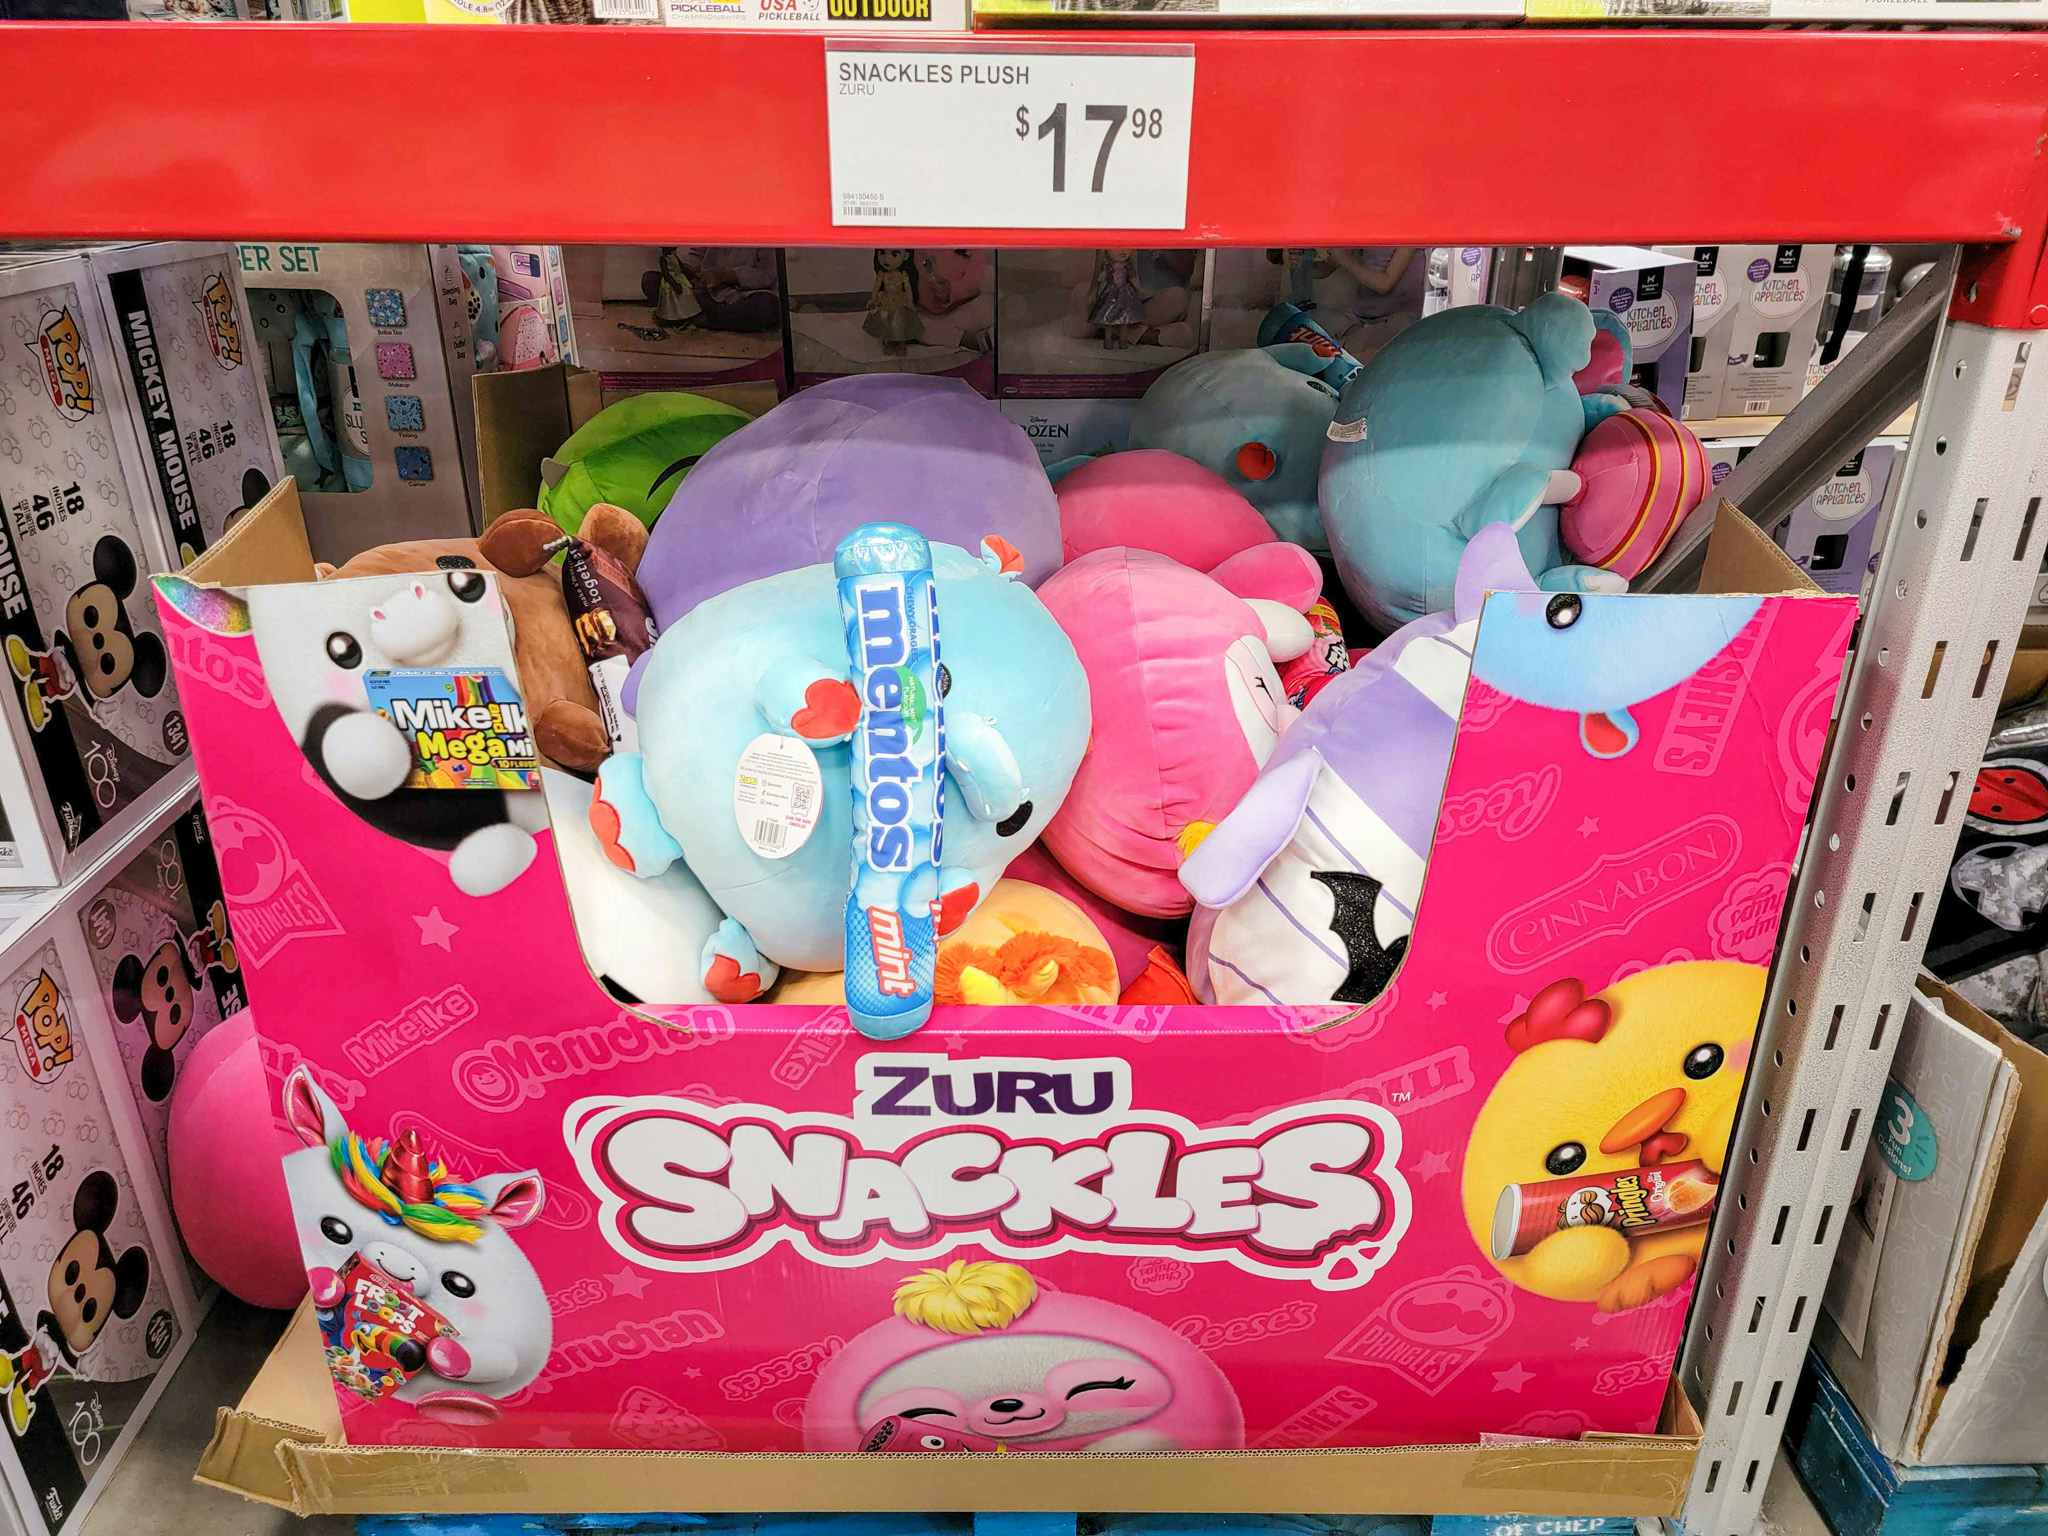 snackles plushes